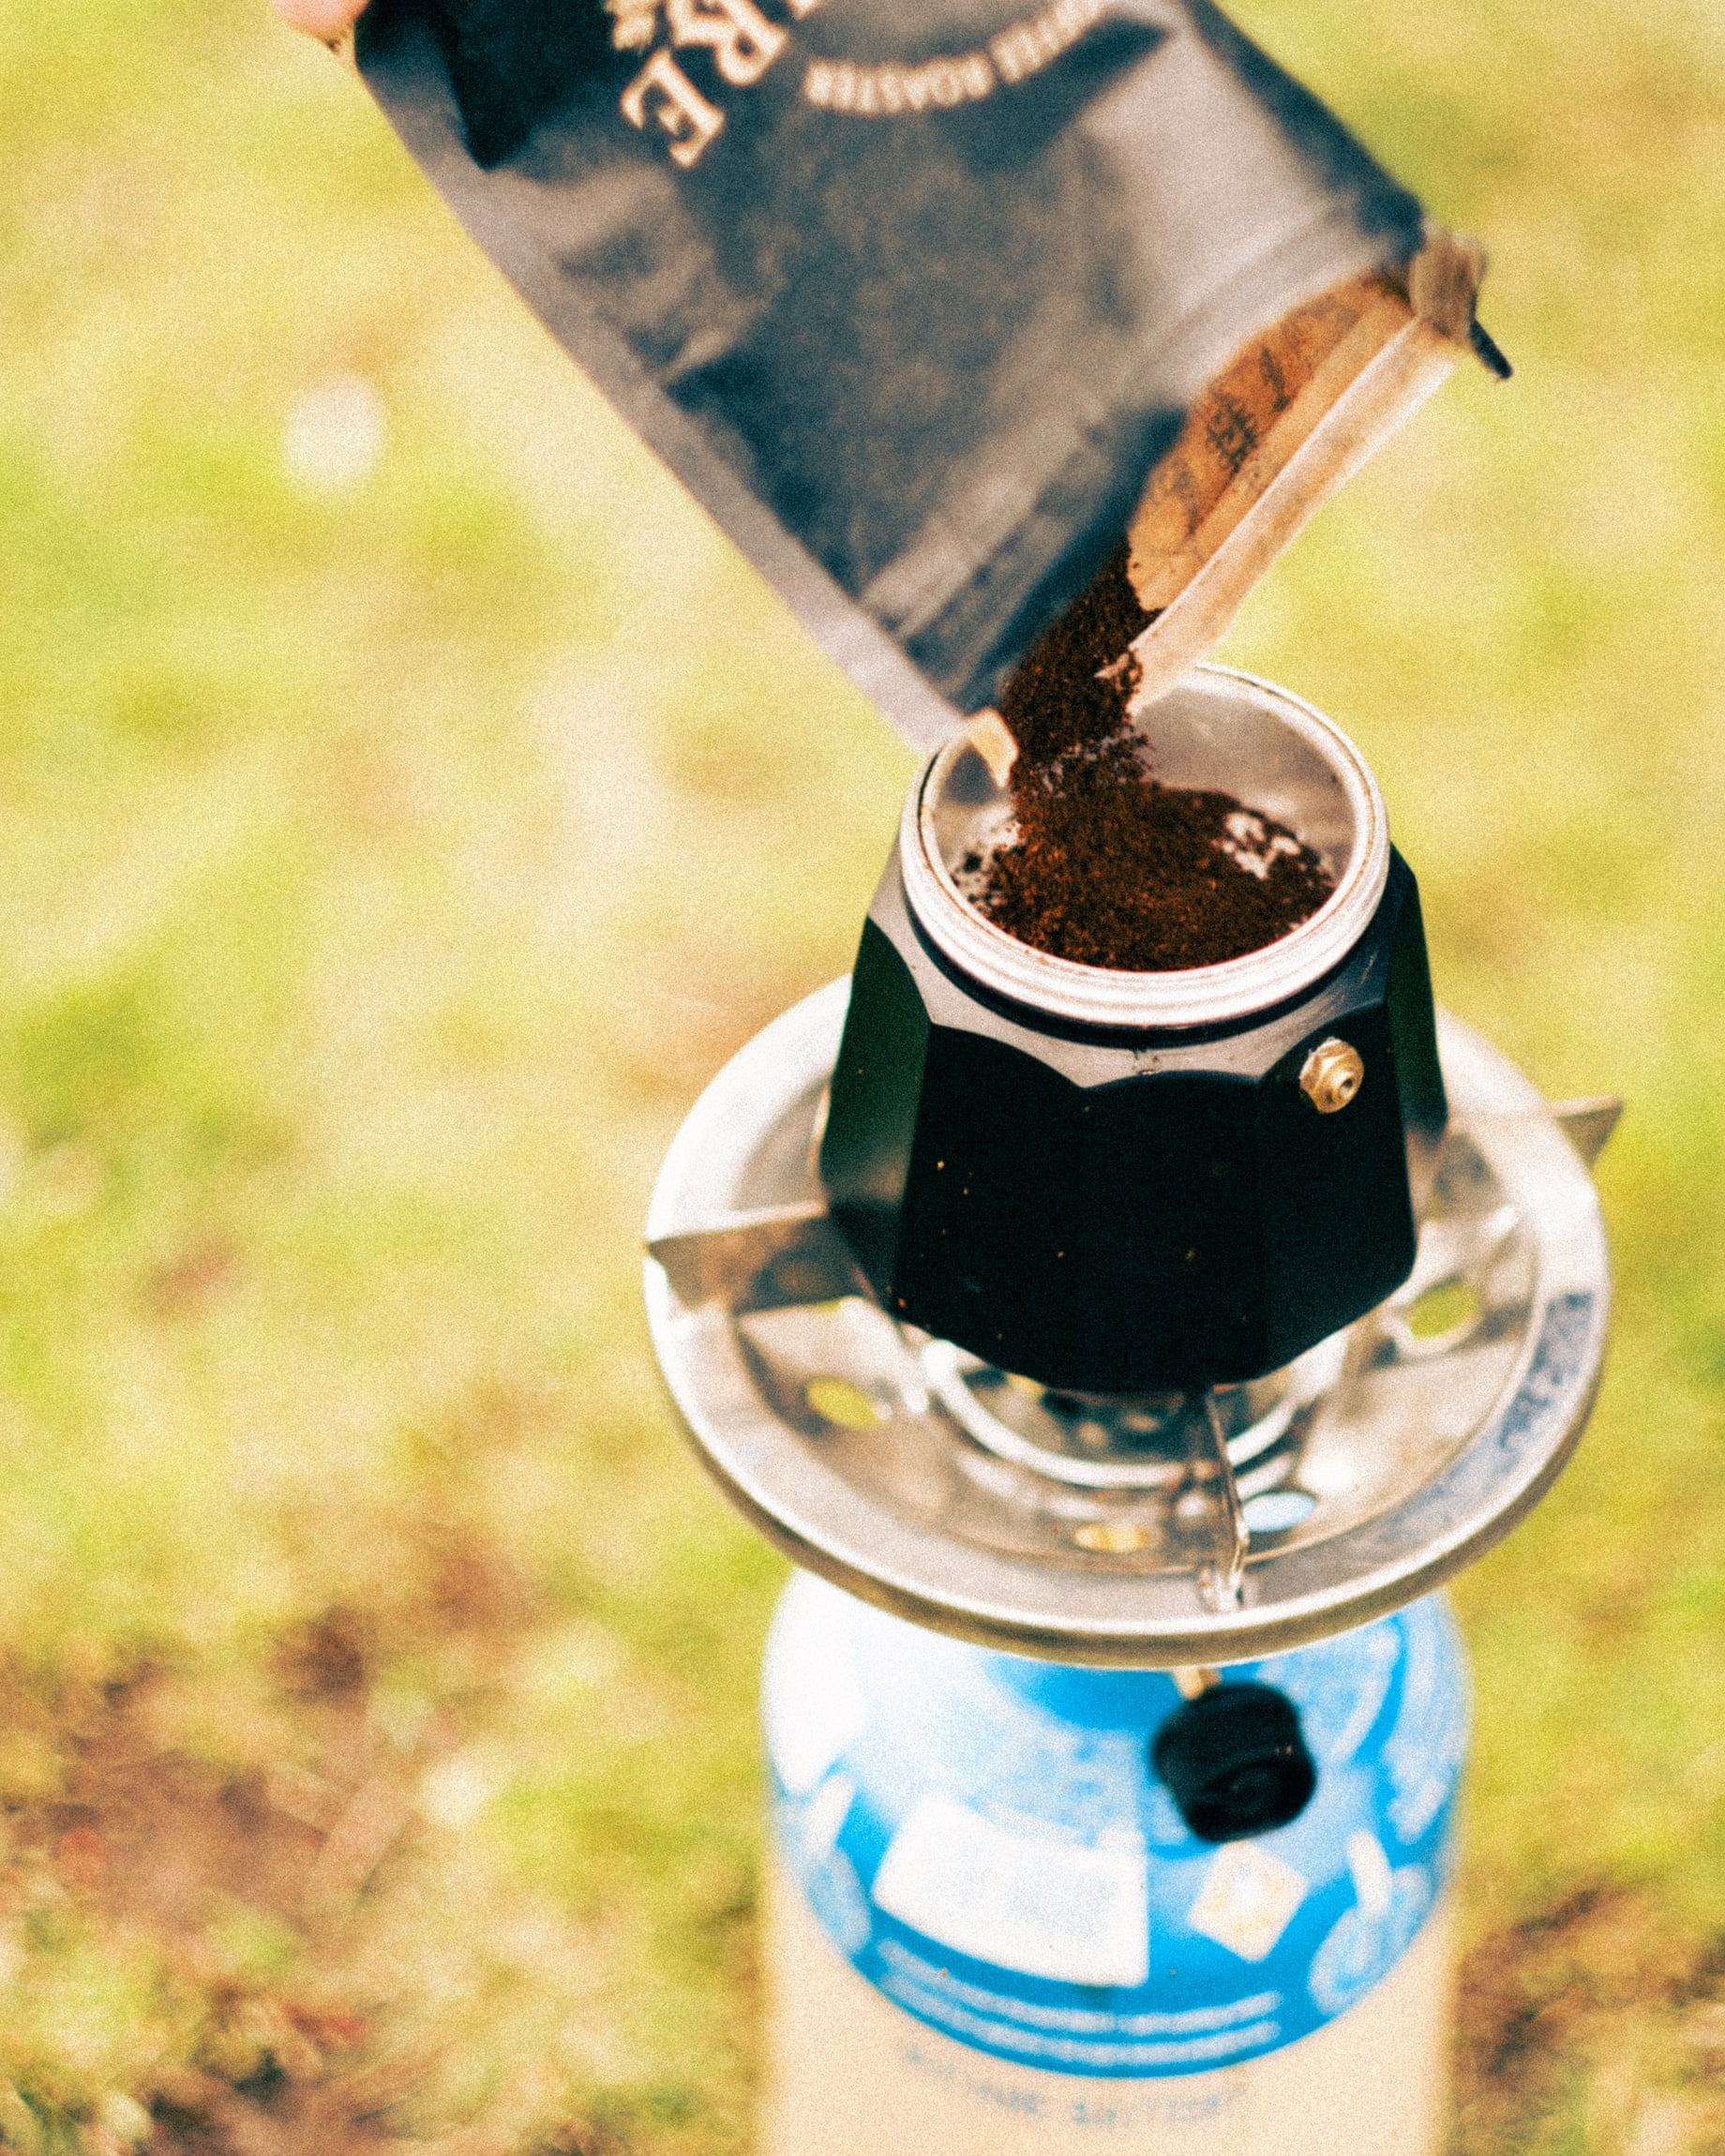 Iron & Fire coffee being poured into the base of a Moka pot on a gas stove outdoors